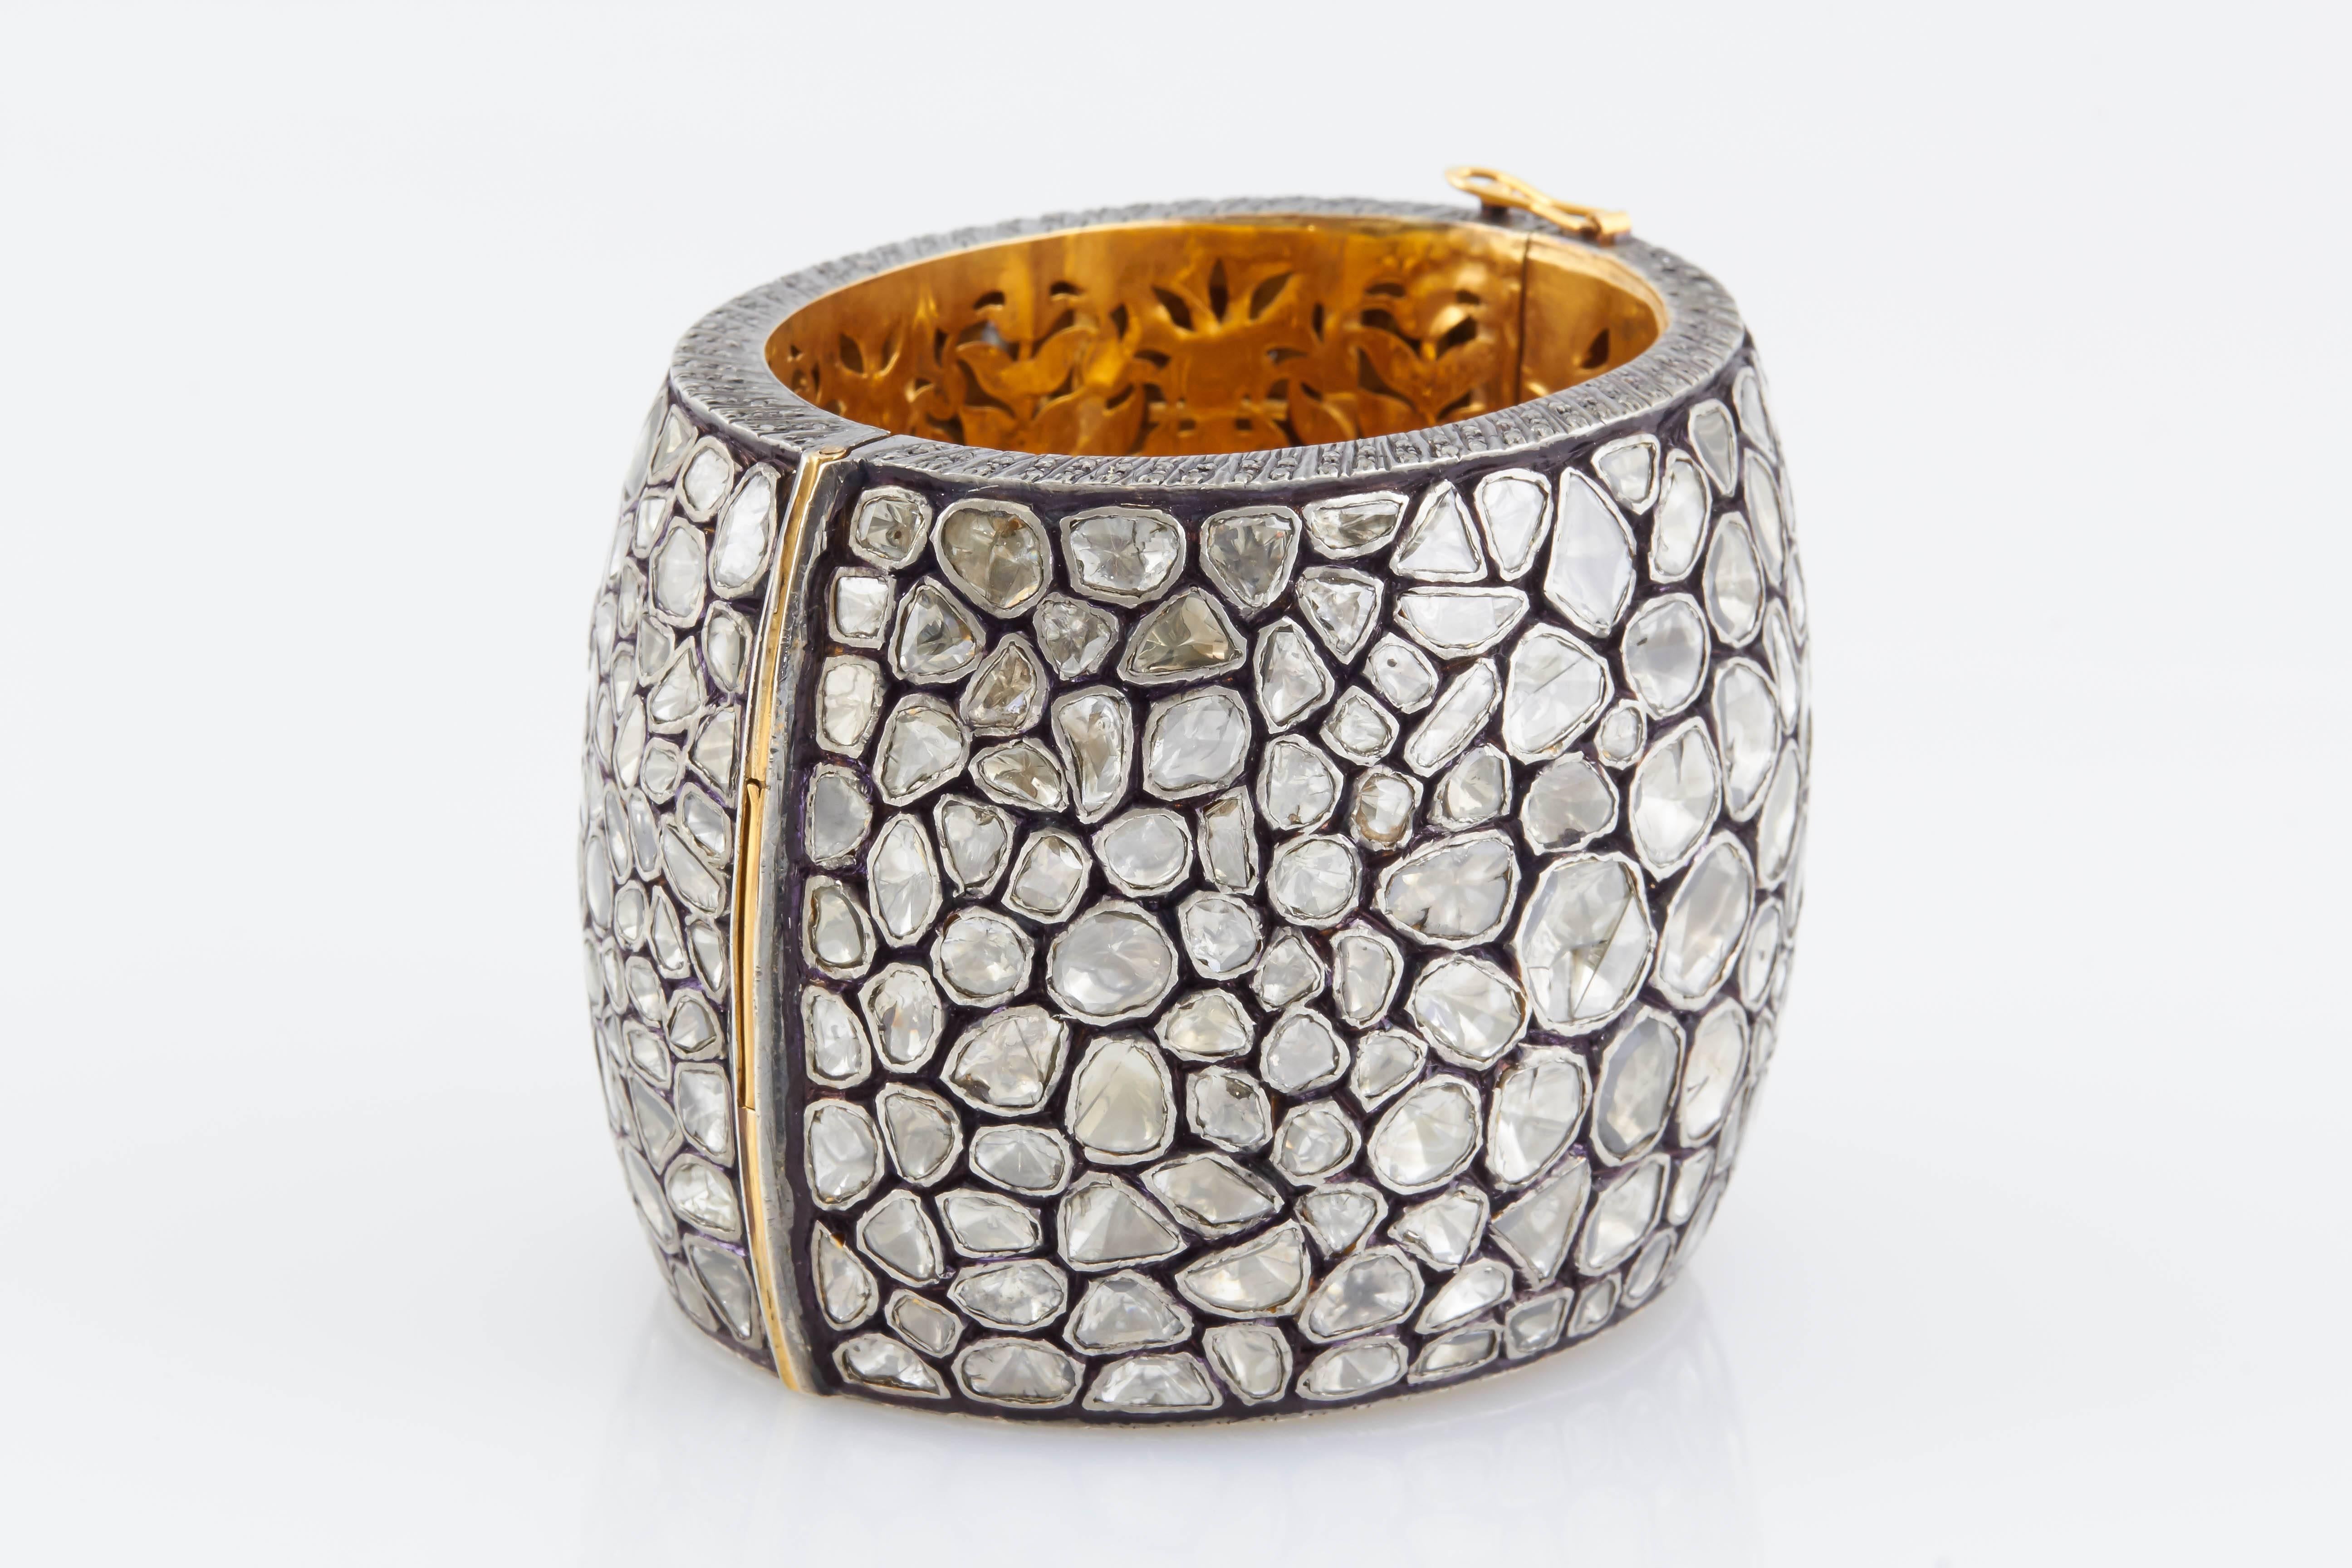 Contemporary Wide Cuff bracelet, finely crafted in silver and gold with varying sizes of rose cut diamonds.  